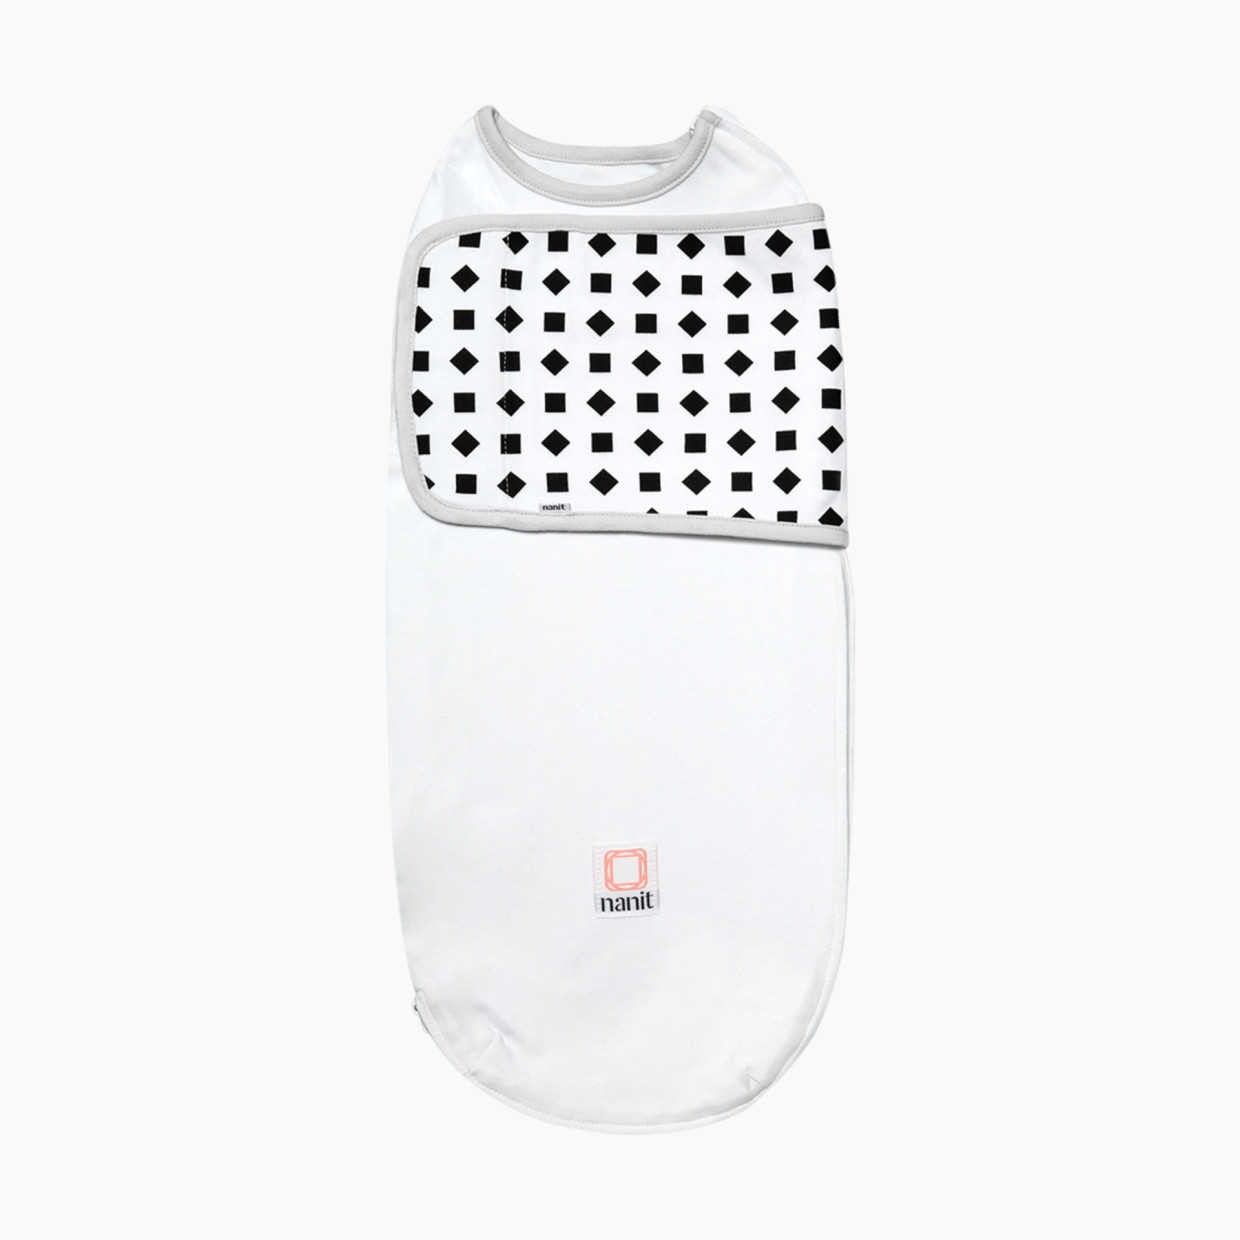 Nanit Breathing Wear Swaddle - White, 3-6 Months.